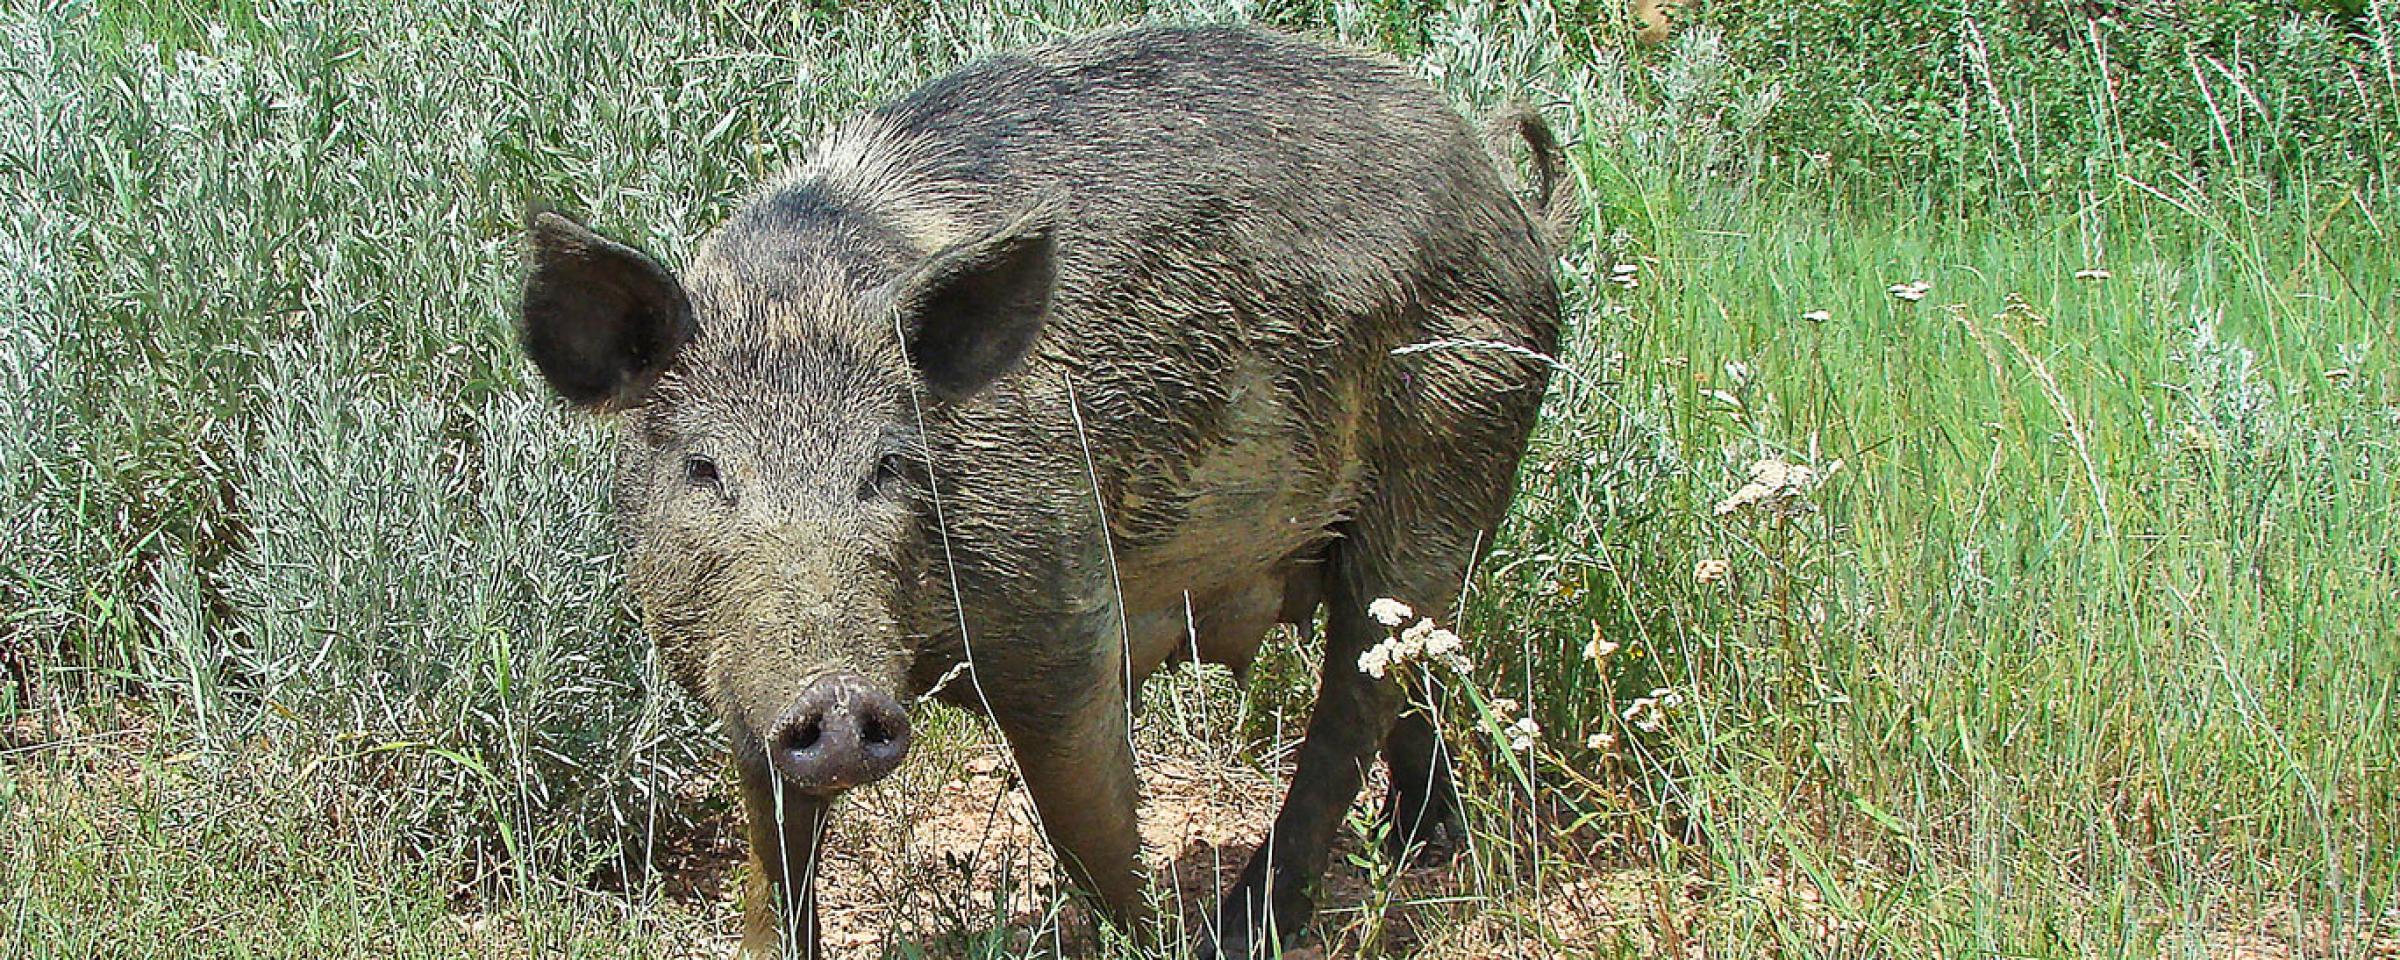 This feral pig was one of a group that was first documented in western North Dakota nearly a decade ago.